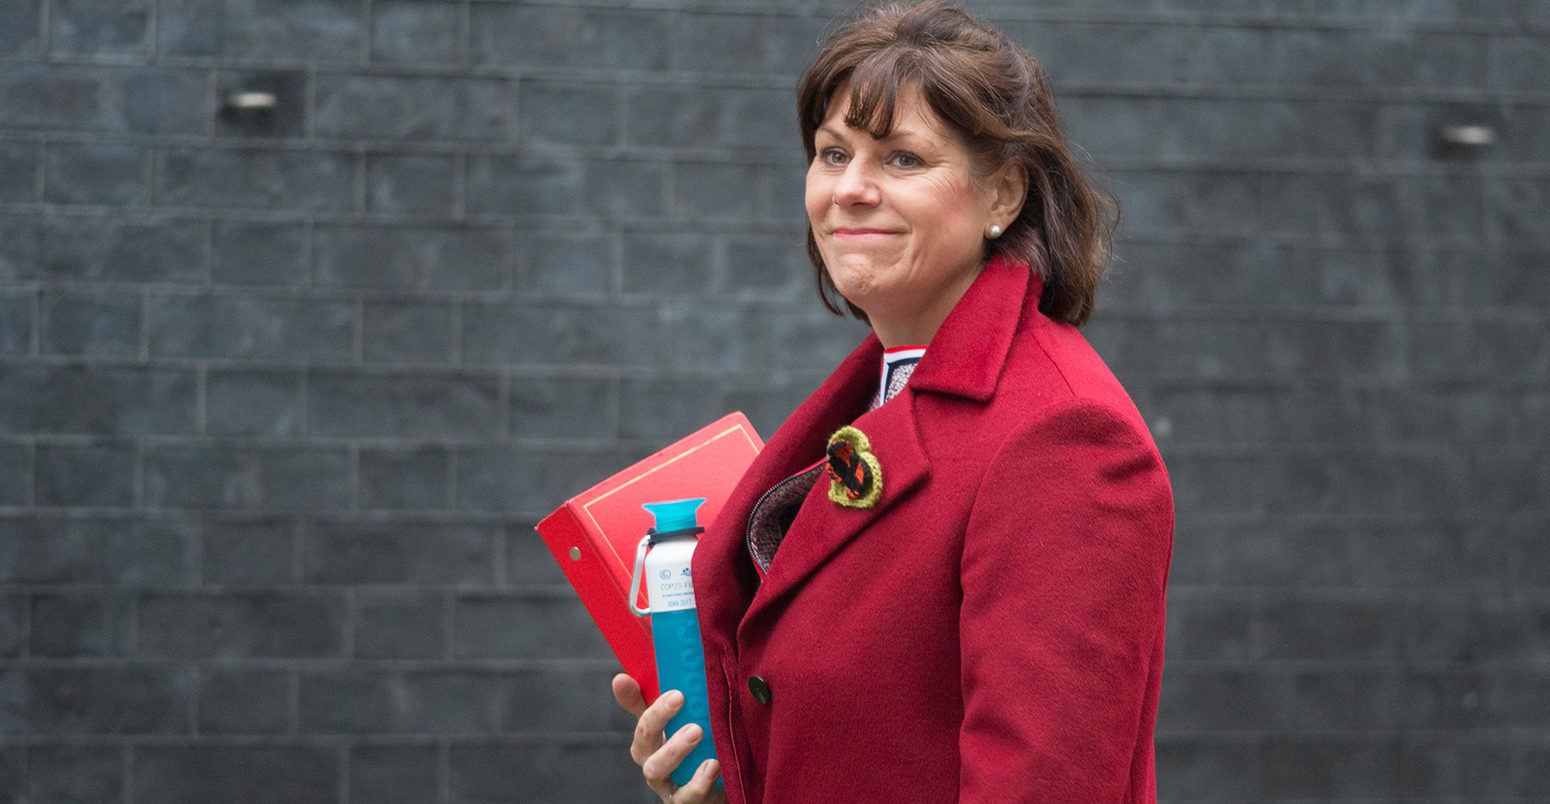 M55JA5 Downing Street, London, UK. 20 February 2018. Claire Perry, Minister of State for Business and Energy, arrives in Downing Street for first weekly cabinet meeting since February recess. Credit: Malcolm Park/Alamy Live News.